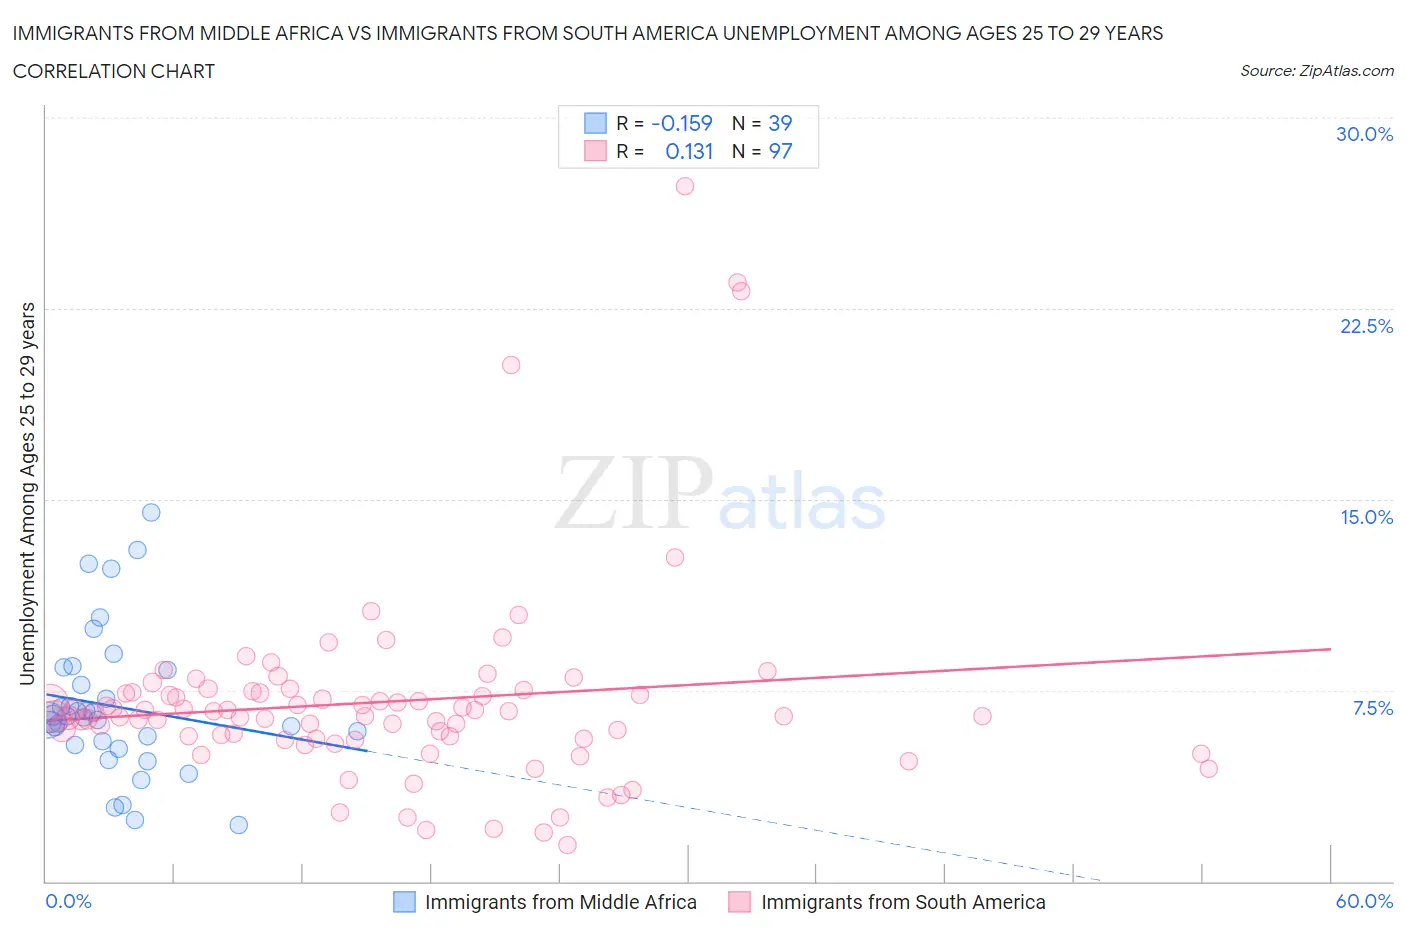 Immigrants from Middle Africa vs Immigrants from South America Unemployment Among Ages 25 to 29 years